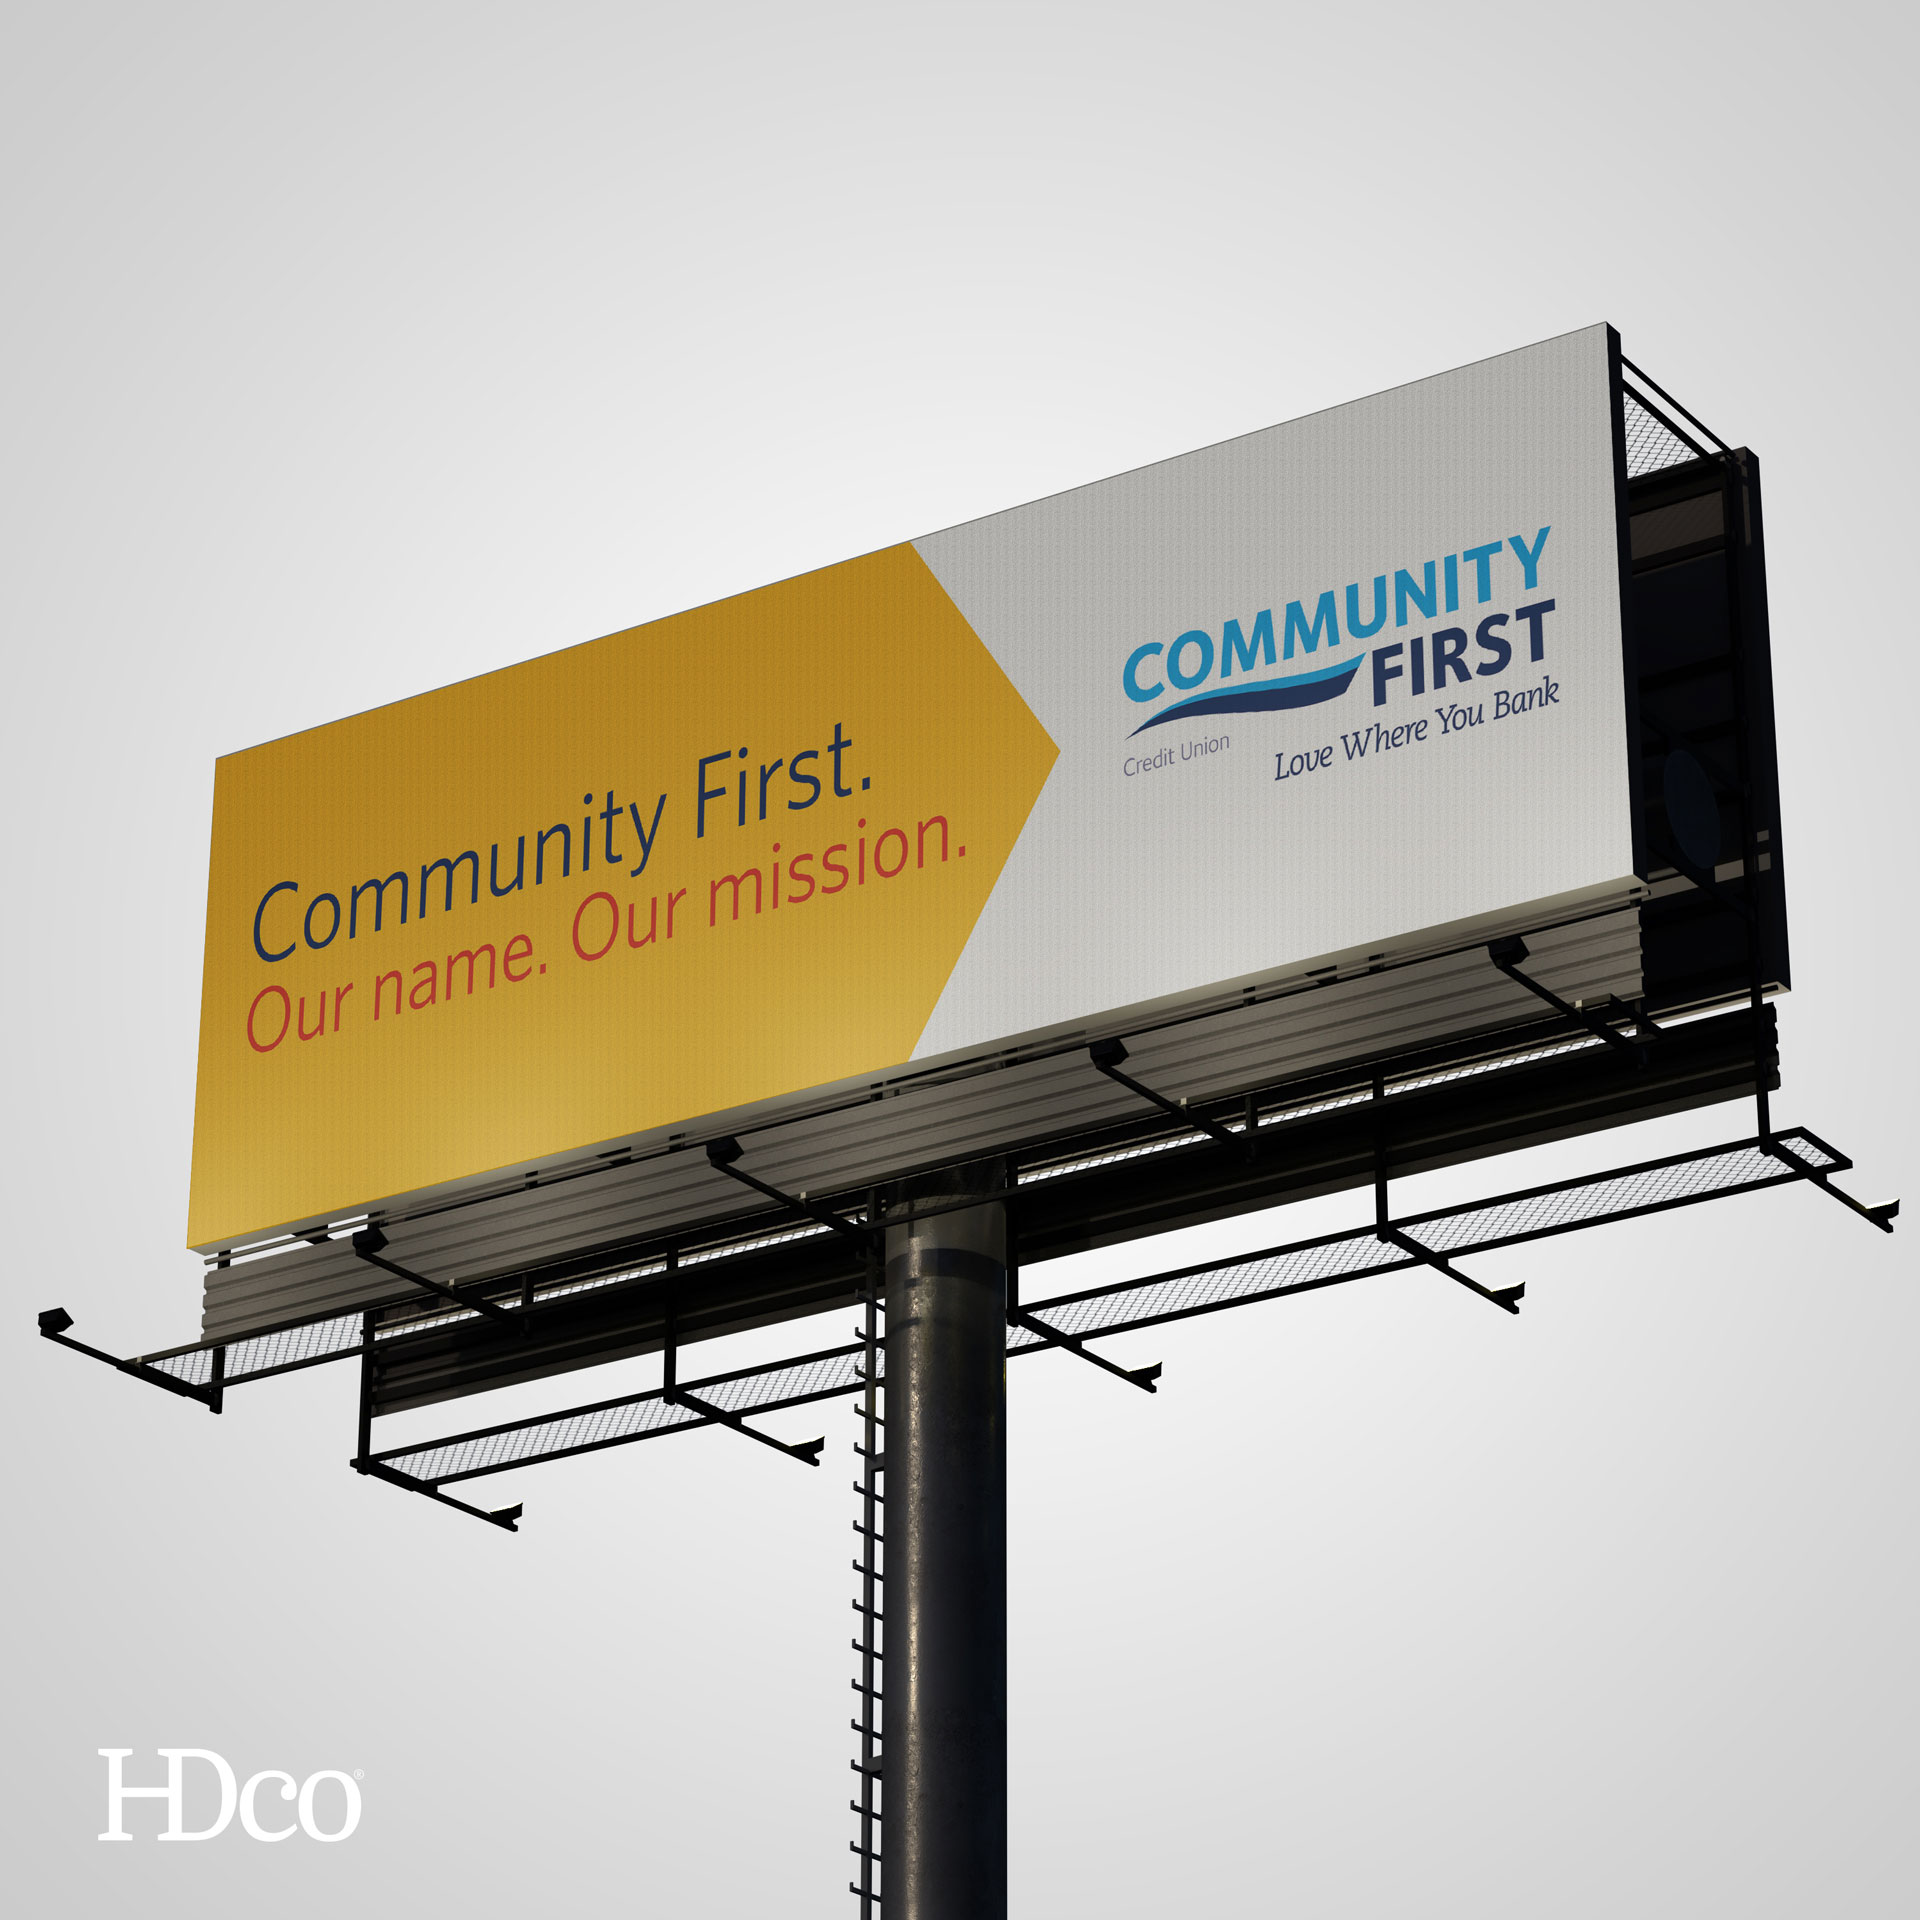 HDco was enlisted to revamp Community First Credit Union's credit and debit cards, as the current design was outdated and unpopular with members. We assembled a team that included a former Citibank executive and a prominent interior designer and researched the competition to identify top-notch designs. The extensive design process resulted in dozens of designs that underwent focus group testing. The winning designs were produced in Chicago. After the successful card redesign, the Director of Marketing requested that we redesign their business website, direct mail, and marketing brochure. As part of the project, HDco updated the logo design. We created a 50-page brand manual to ensure consistency across the brand, including brand standards, voice, icon library, photography, advertising, direct mail, and outdoor.